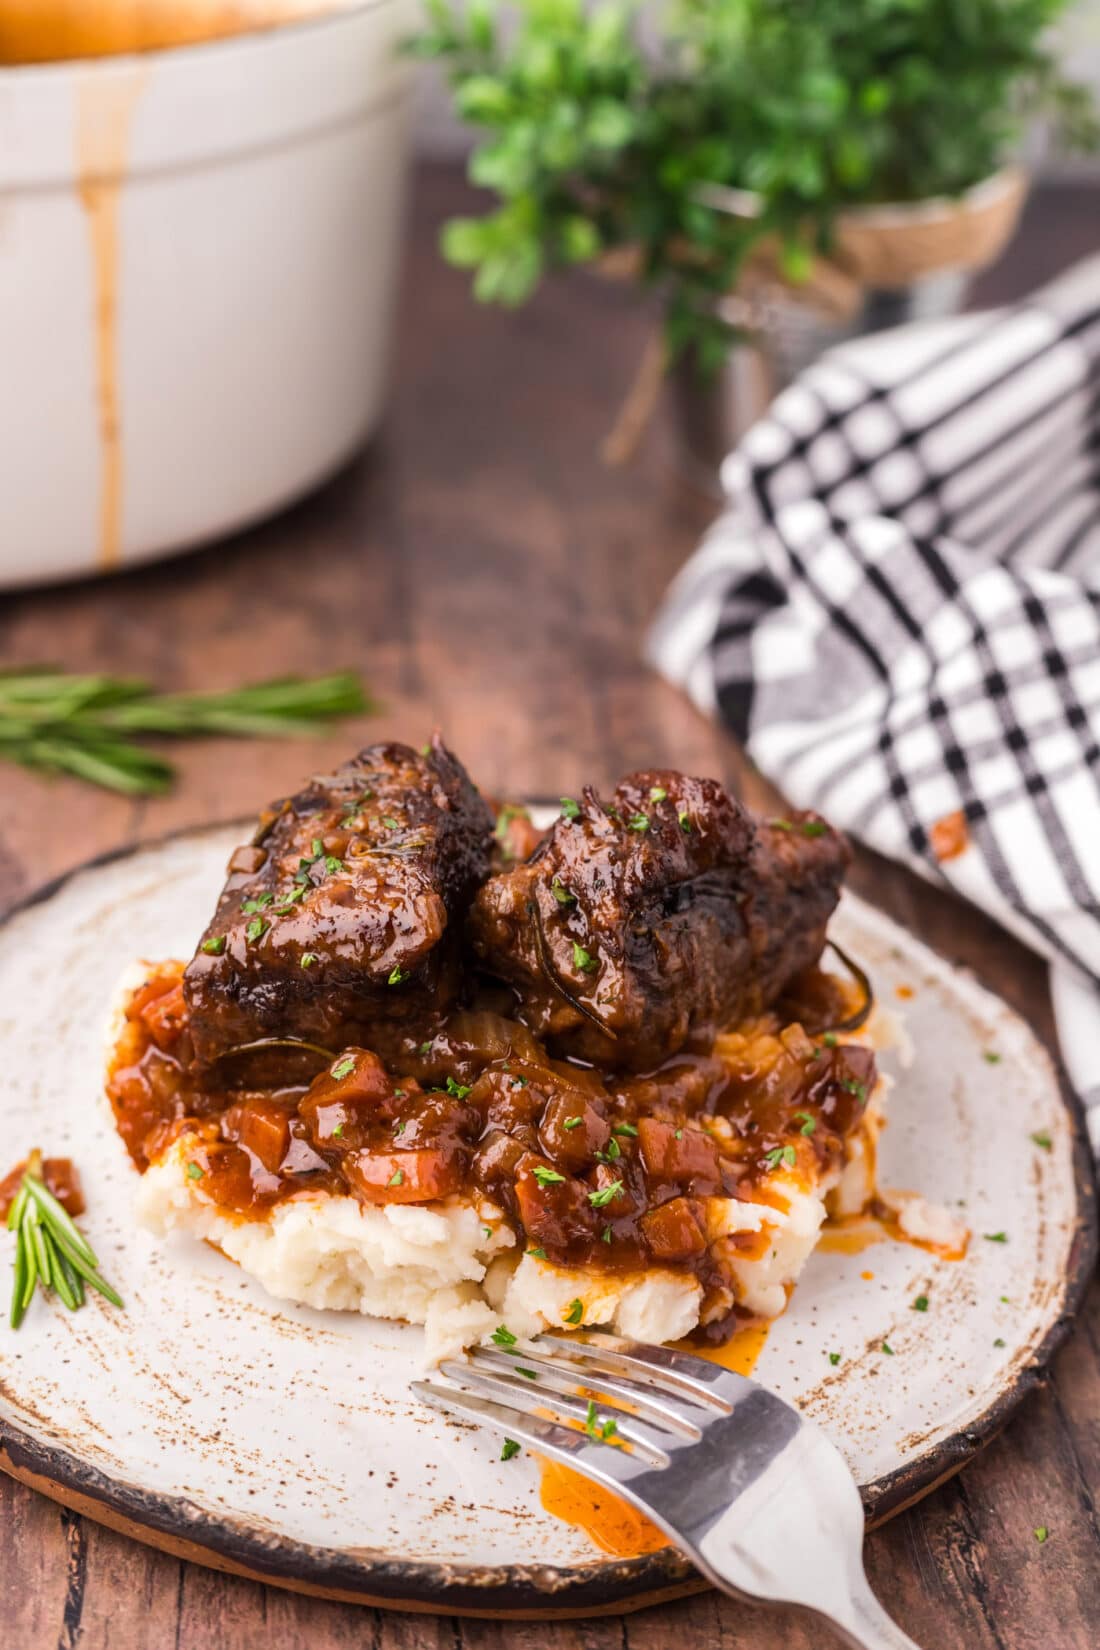 Braised Beef Short Ribs served over mashed potatoes